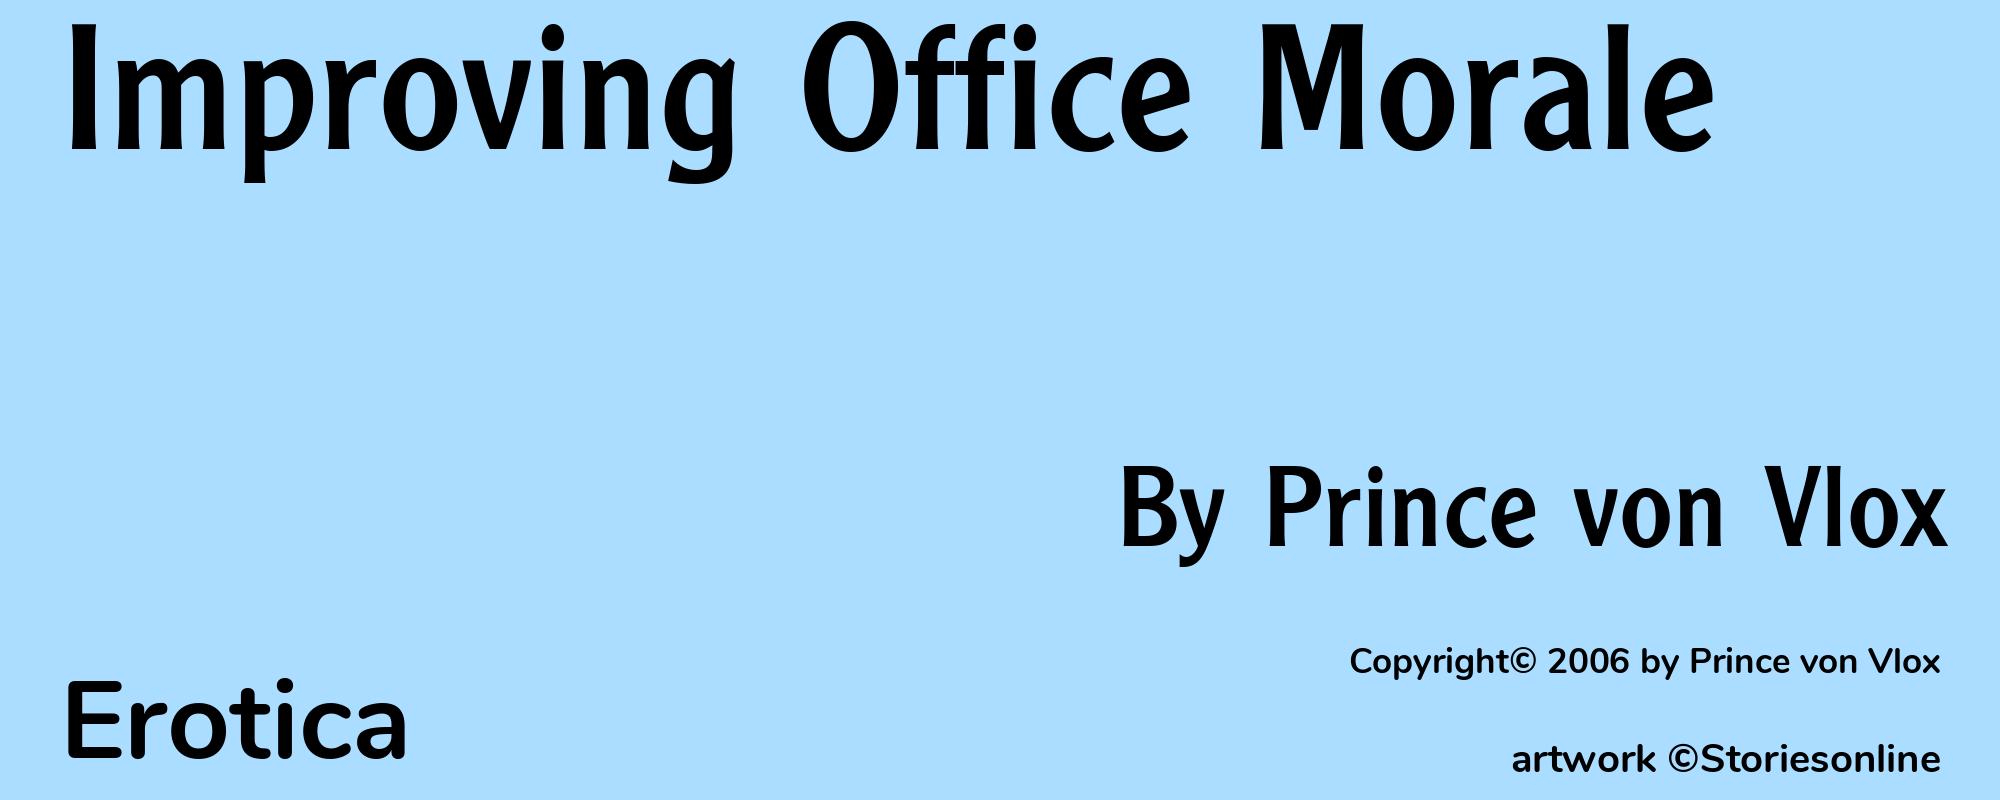 Improving Office Morale - Cover